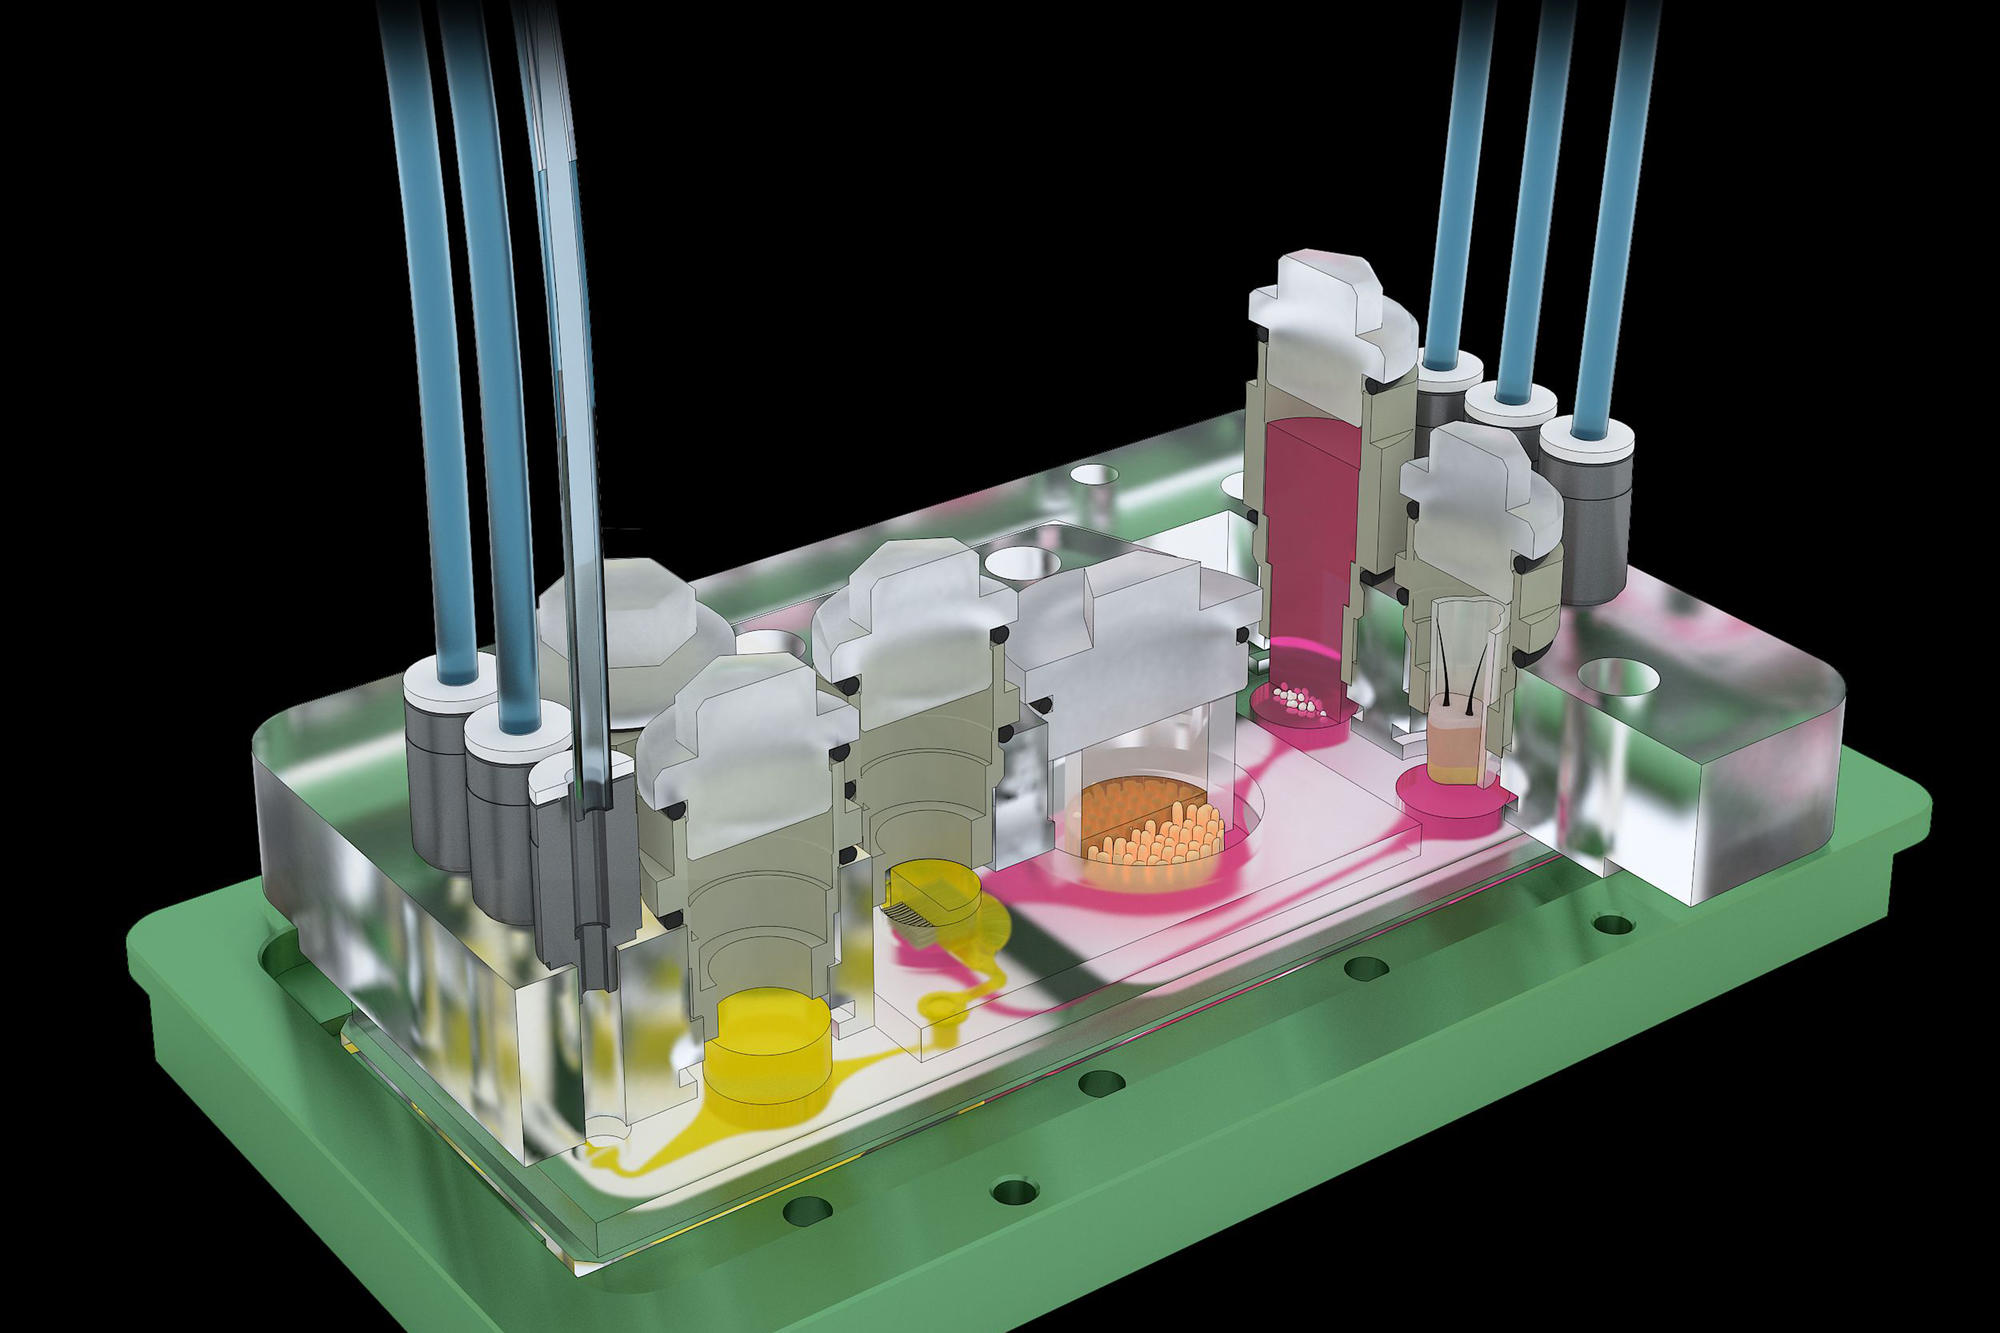 Cross-sectional model representation of the organ-on-a-chip technology.